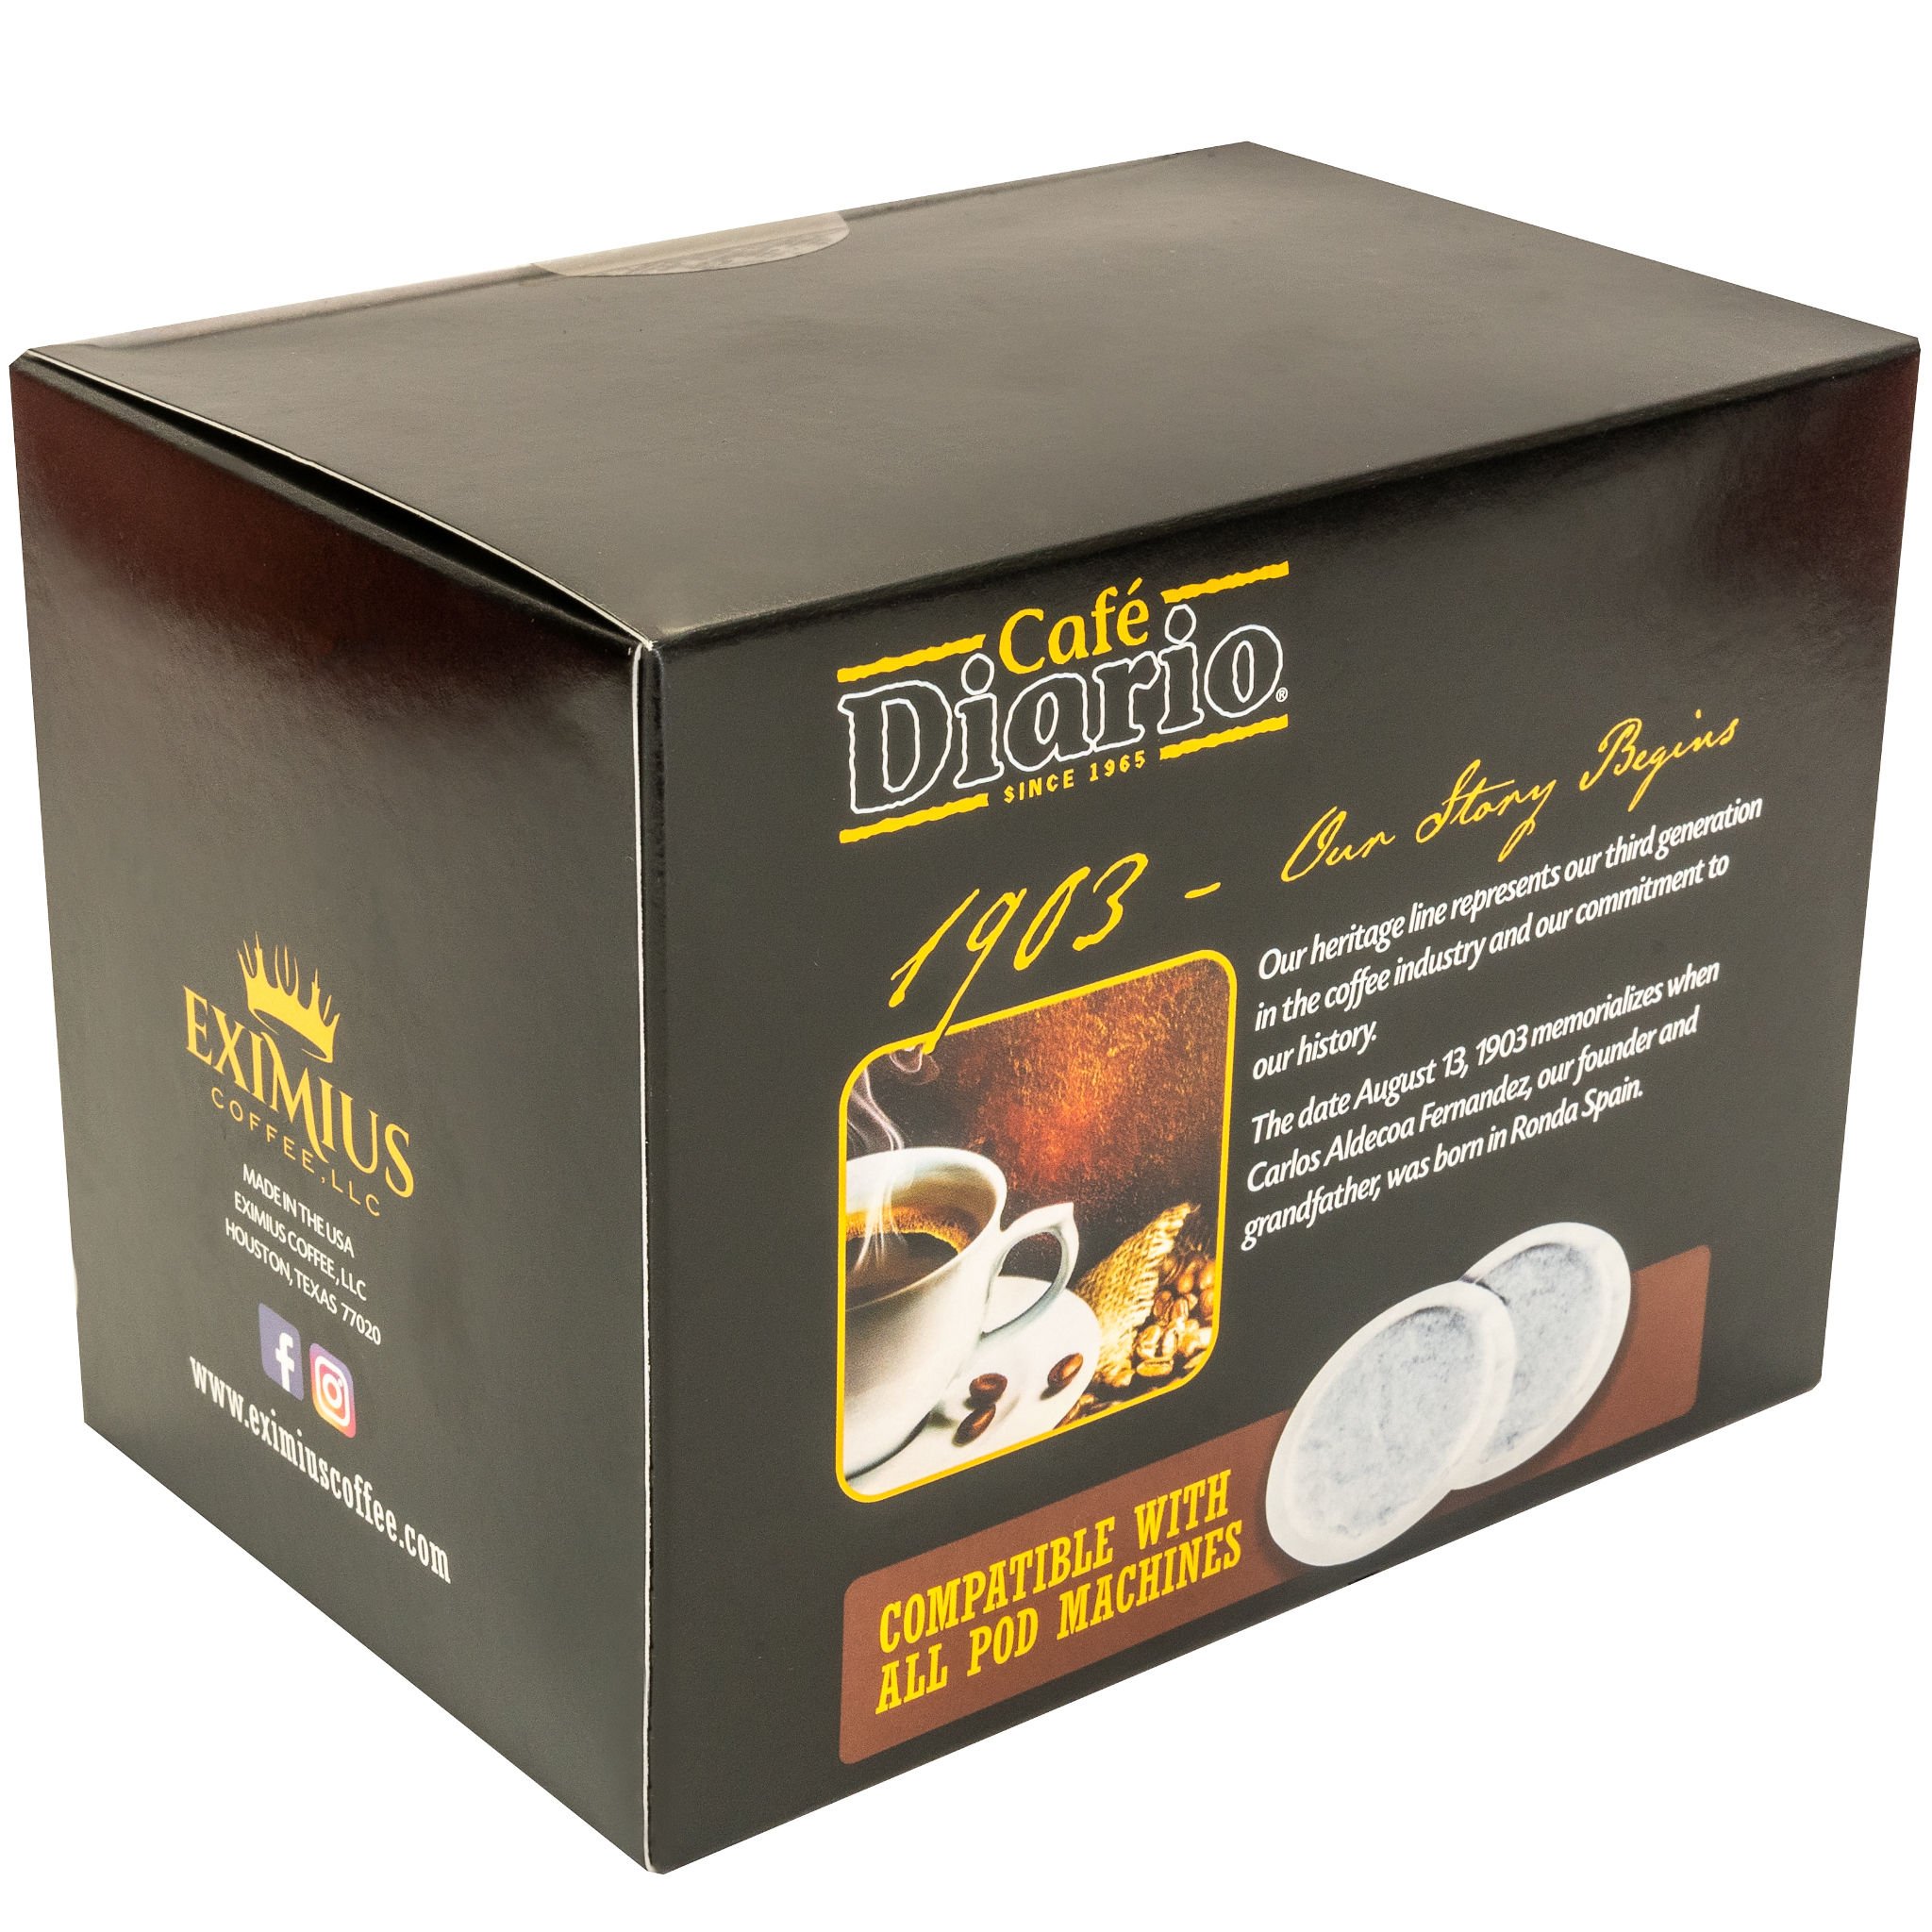 60 Pack Single Serve Coffee Capsules from CoffeeTeabox